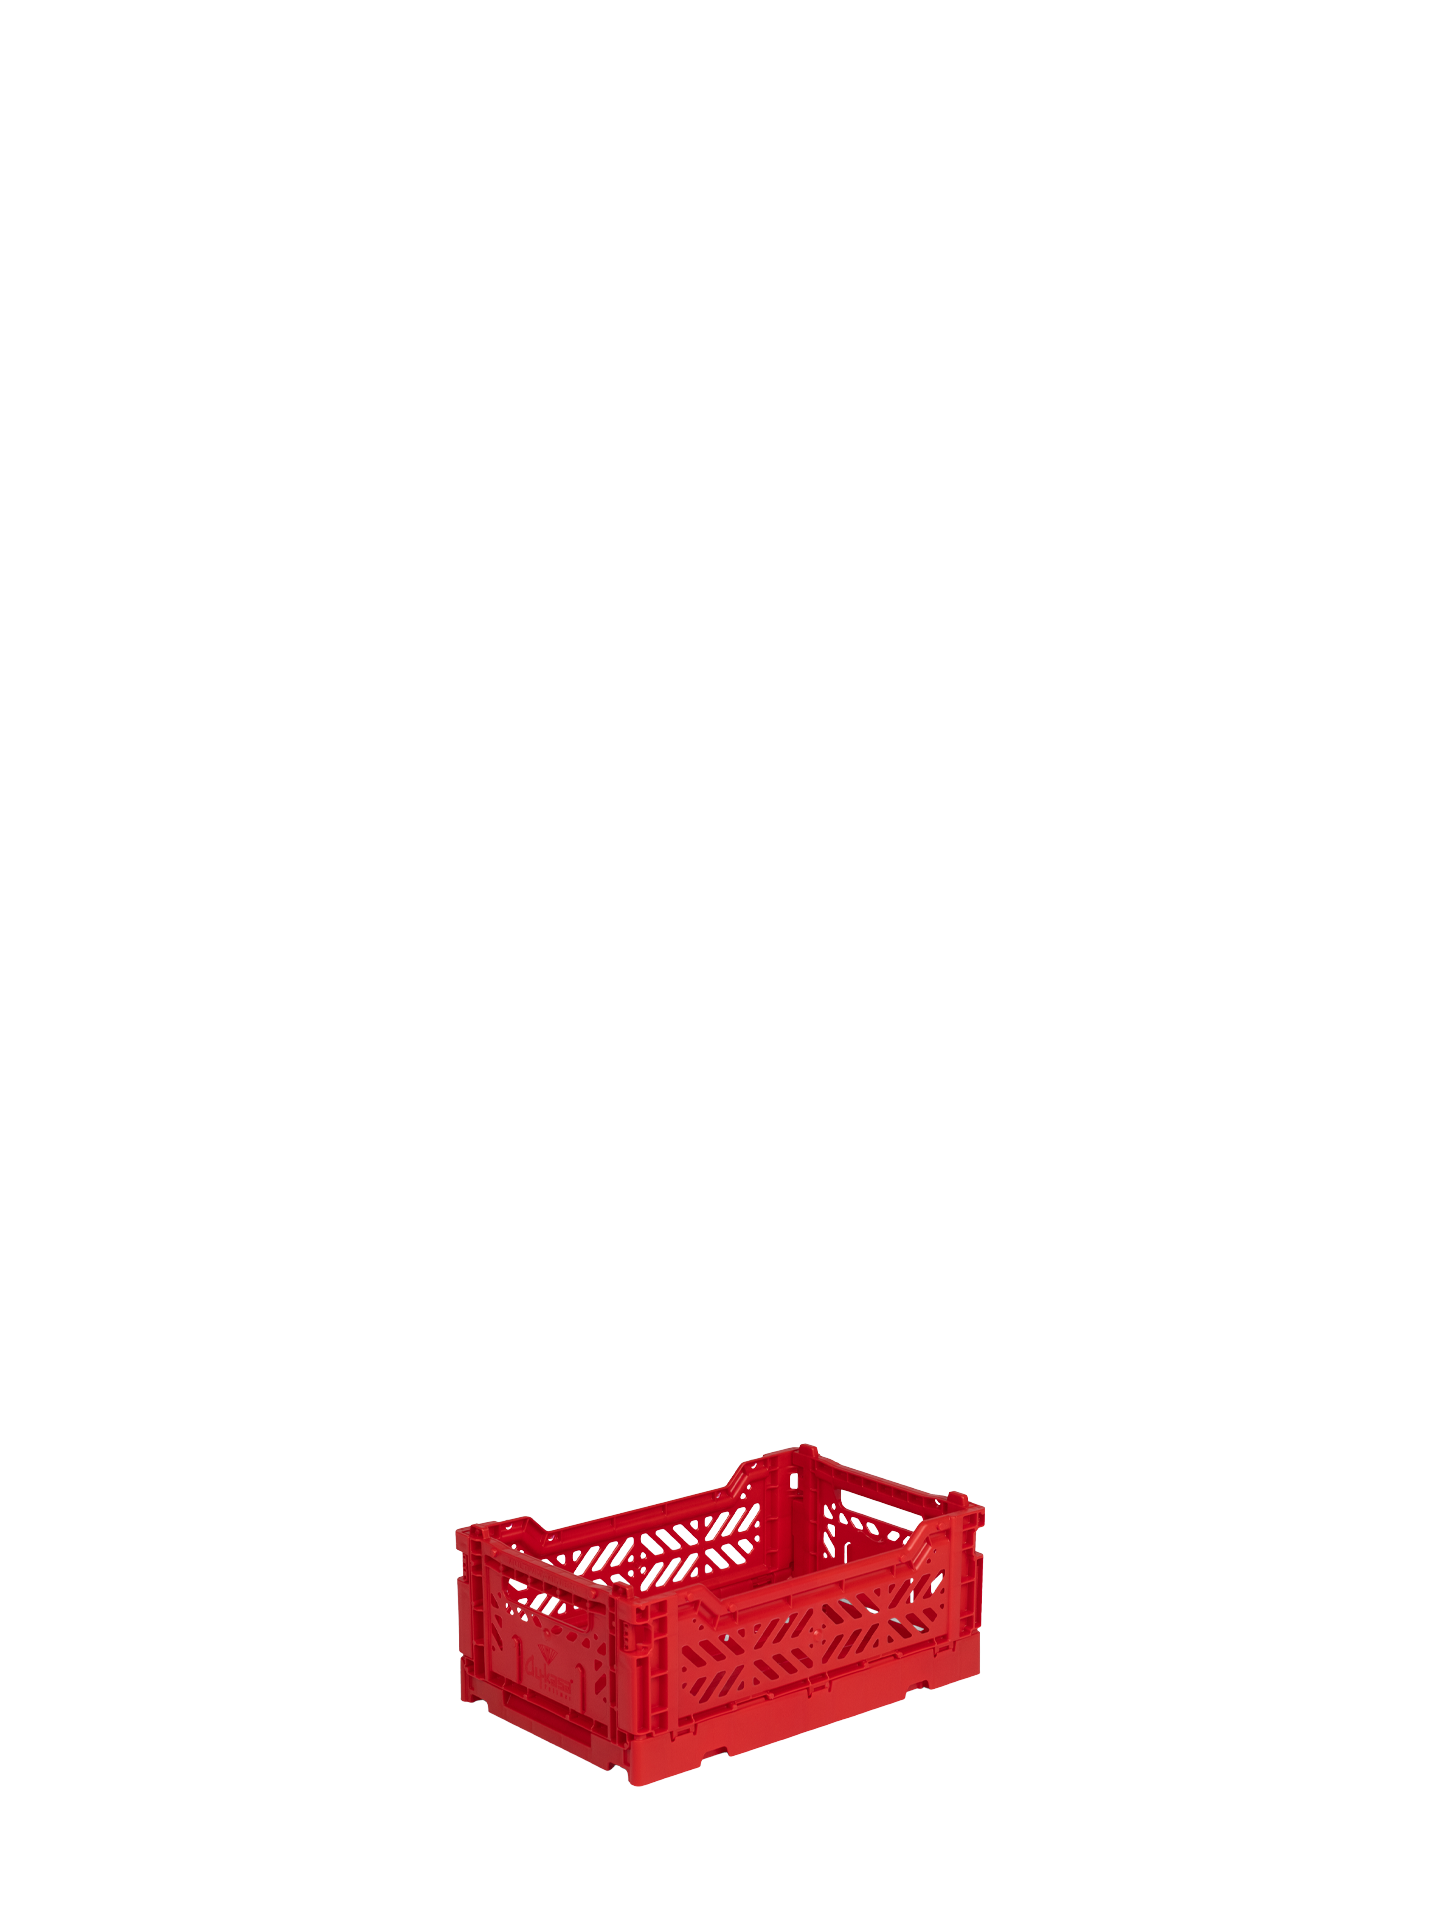 Mini Aykasa crate in true red stacks and folds